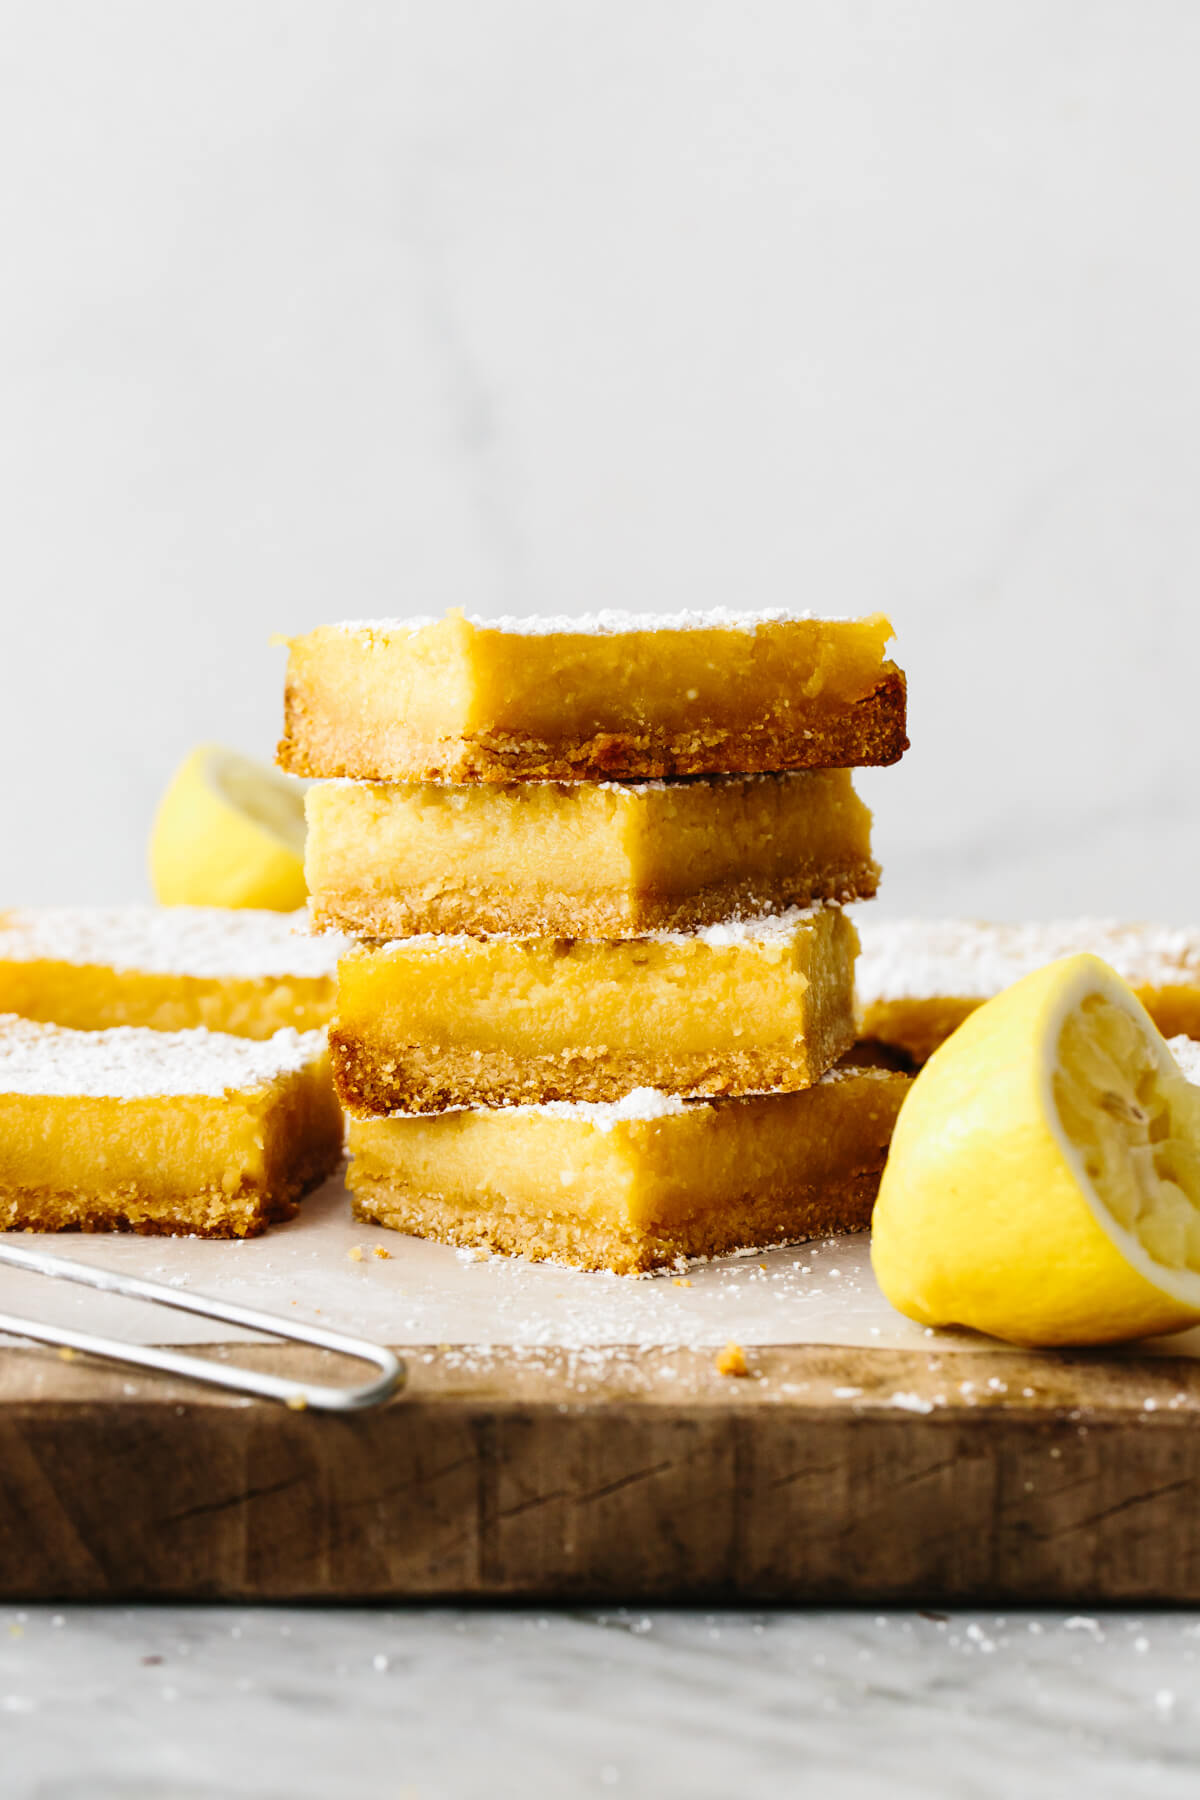 A pile of lemon bars on a wooden board.